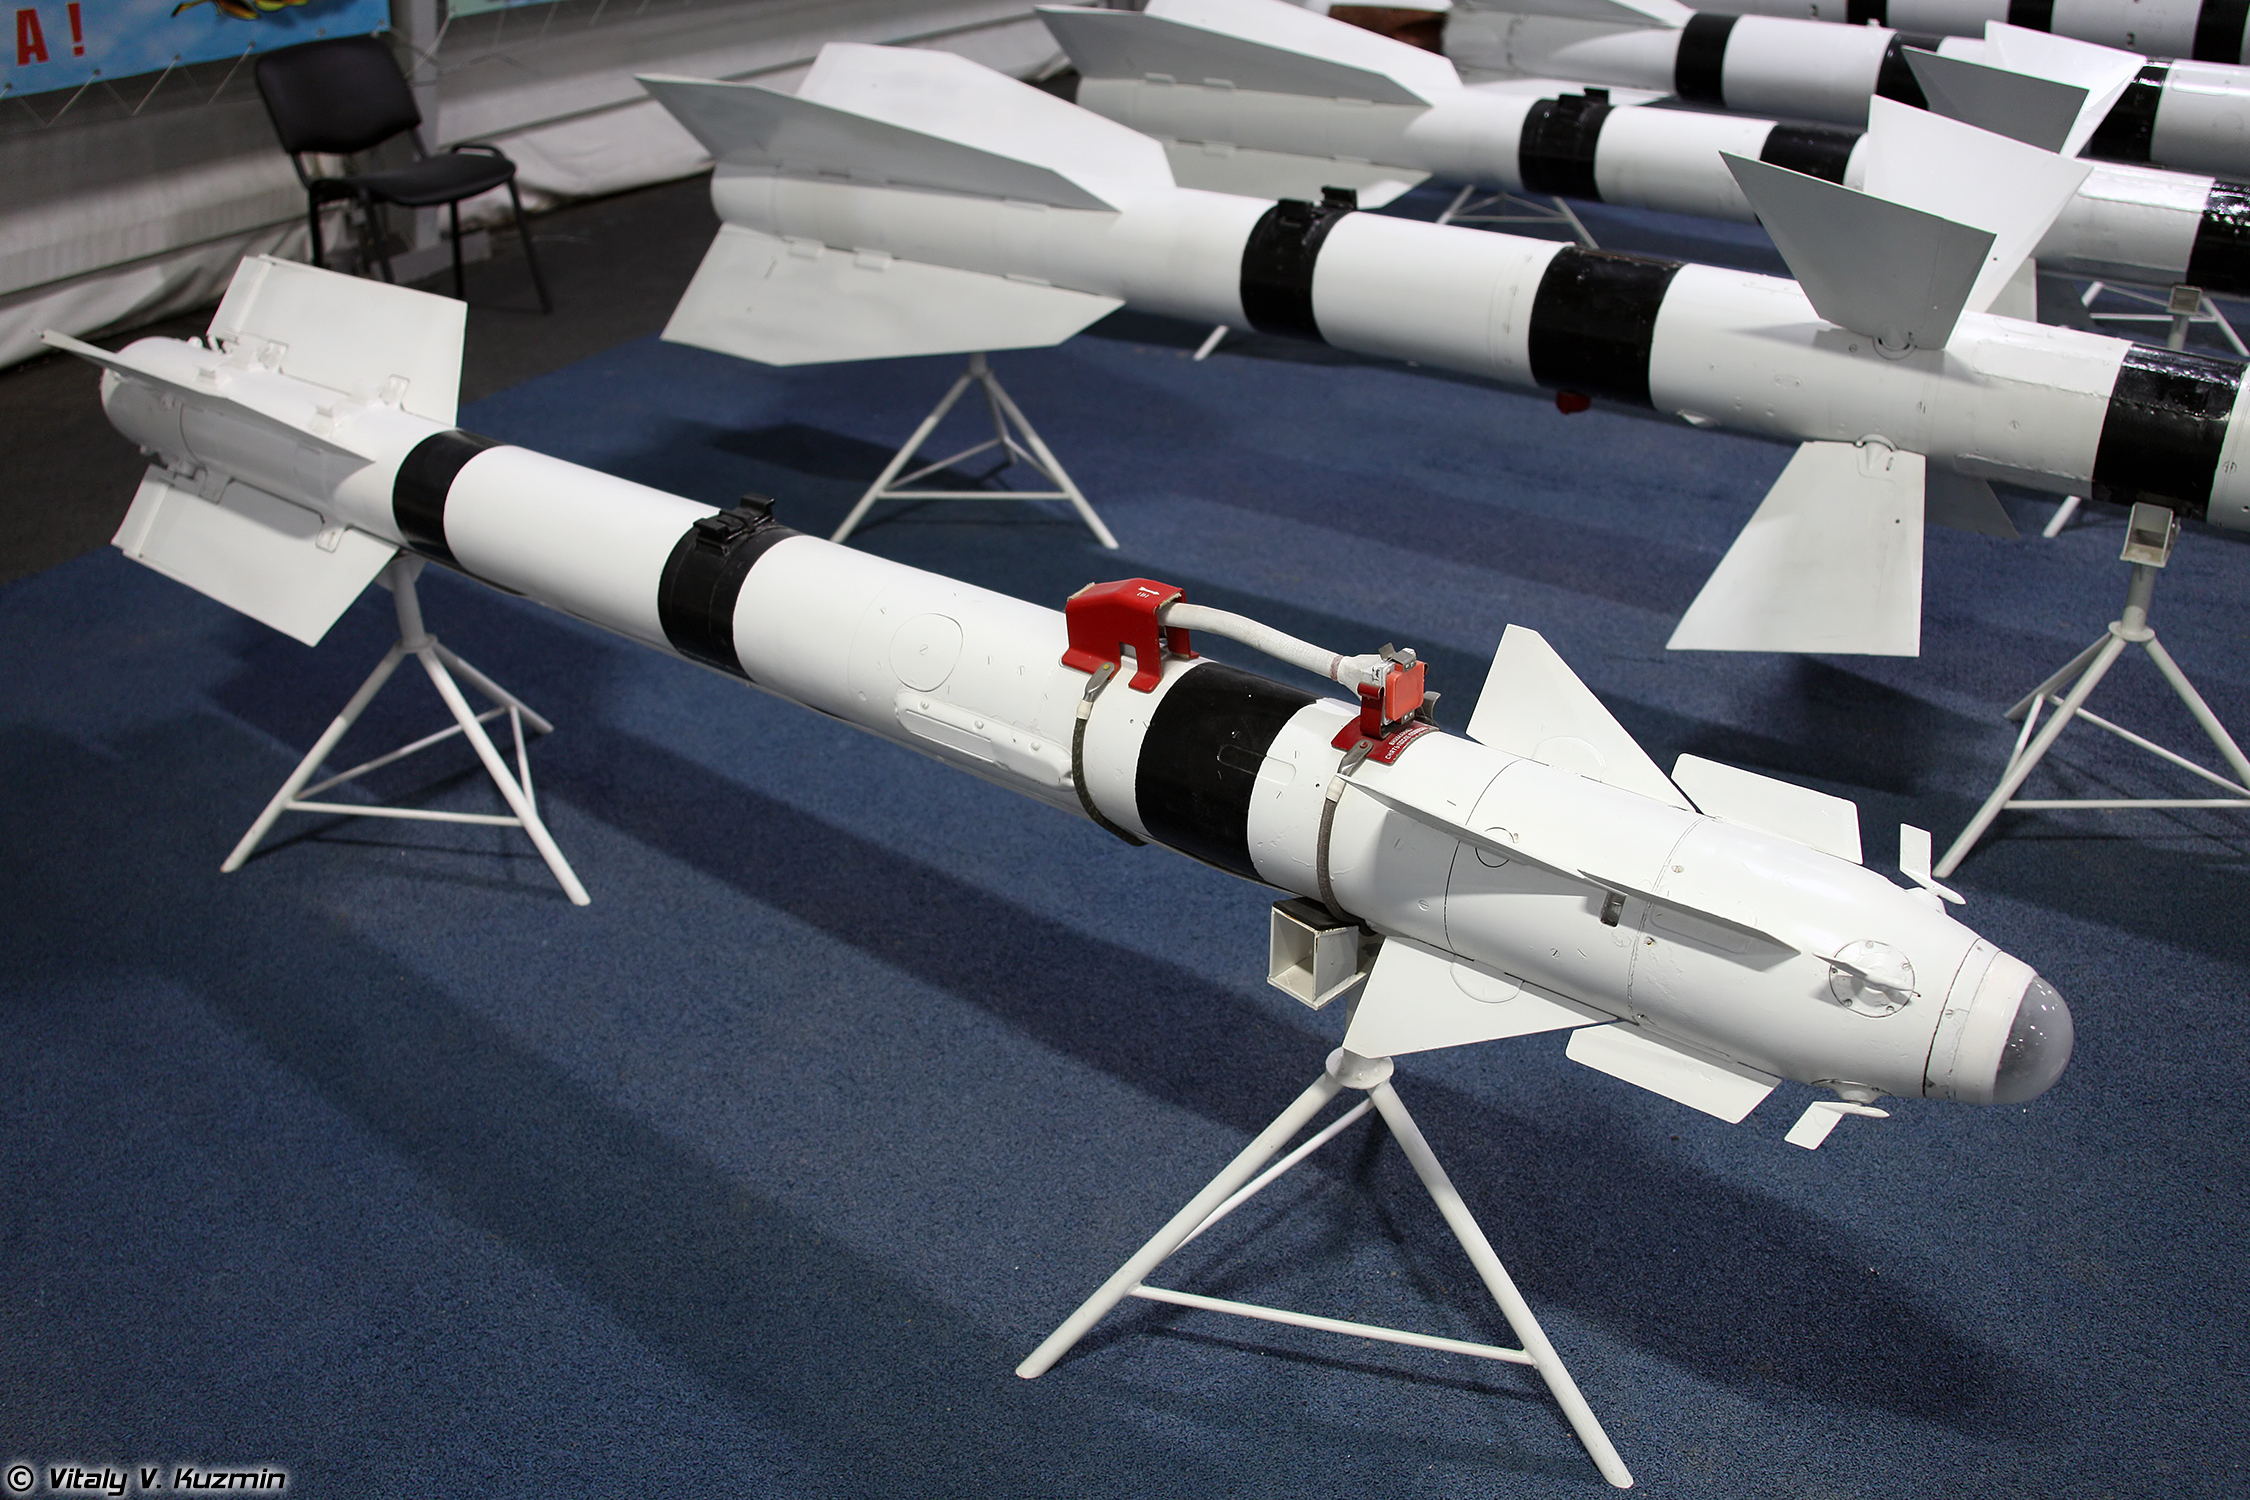 File:R-73 short-range air-to-air missile in Park Patriot 01.jpg - Wikimedia Commons